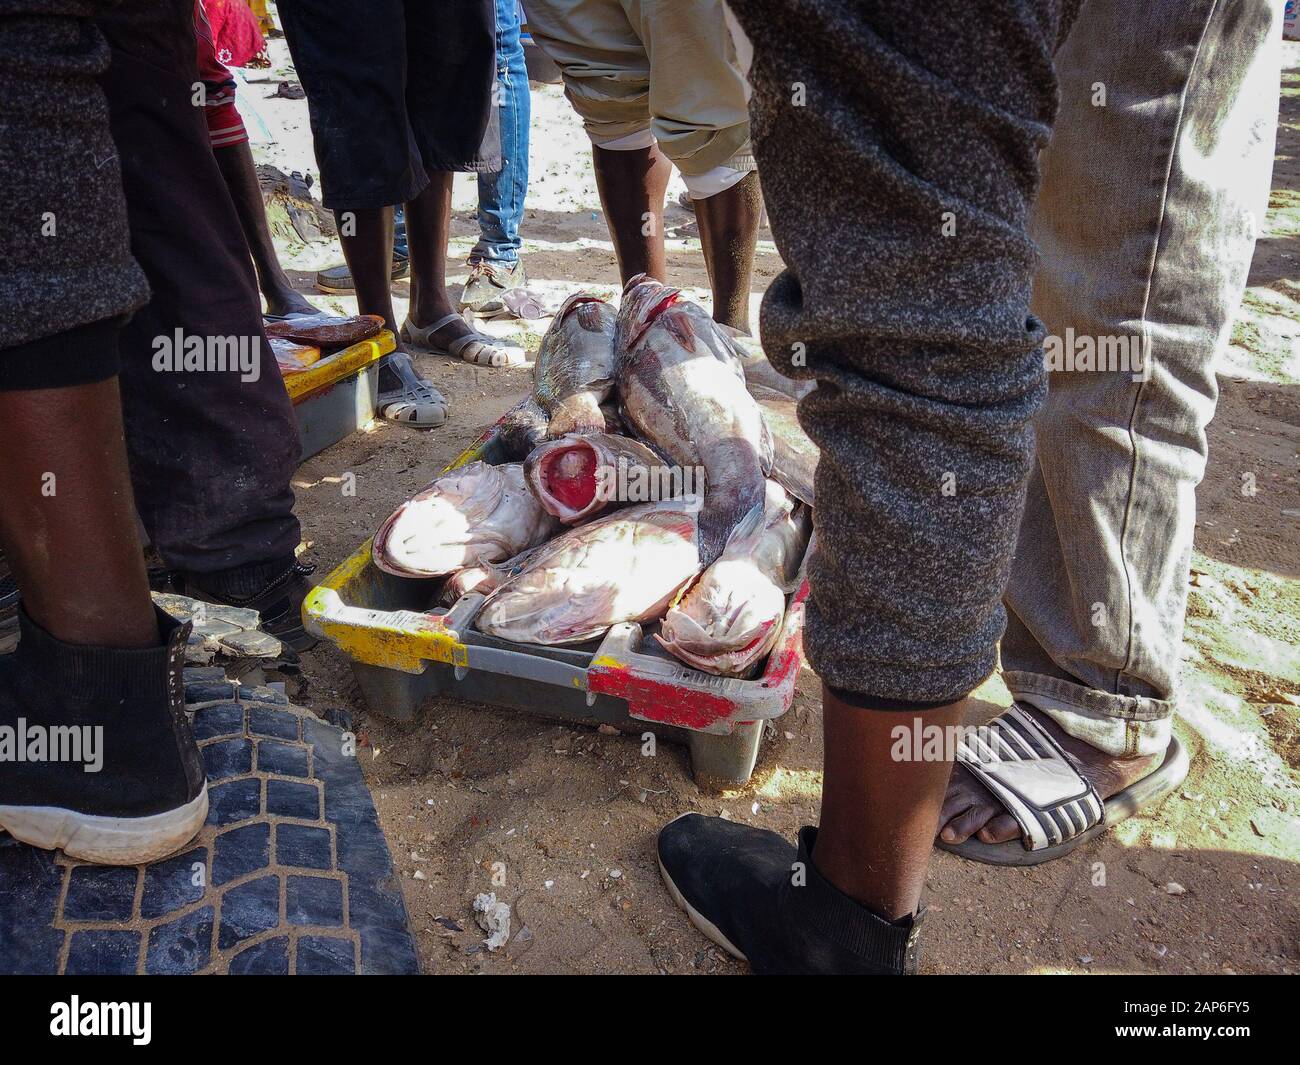 Fresh fishes are in a box on the ground in the sand. There are people around who want to buy them at a fish market in Mbour, Senegal. It's near Dakar Stock Photo